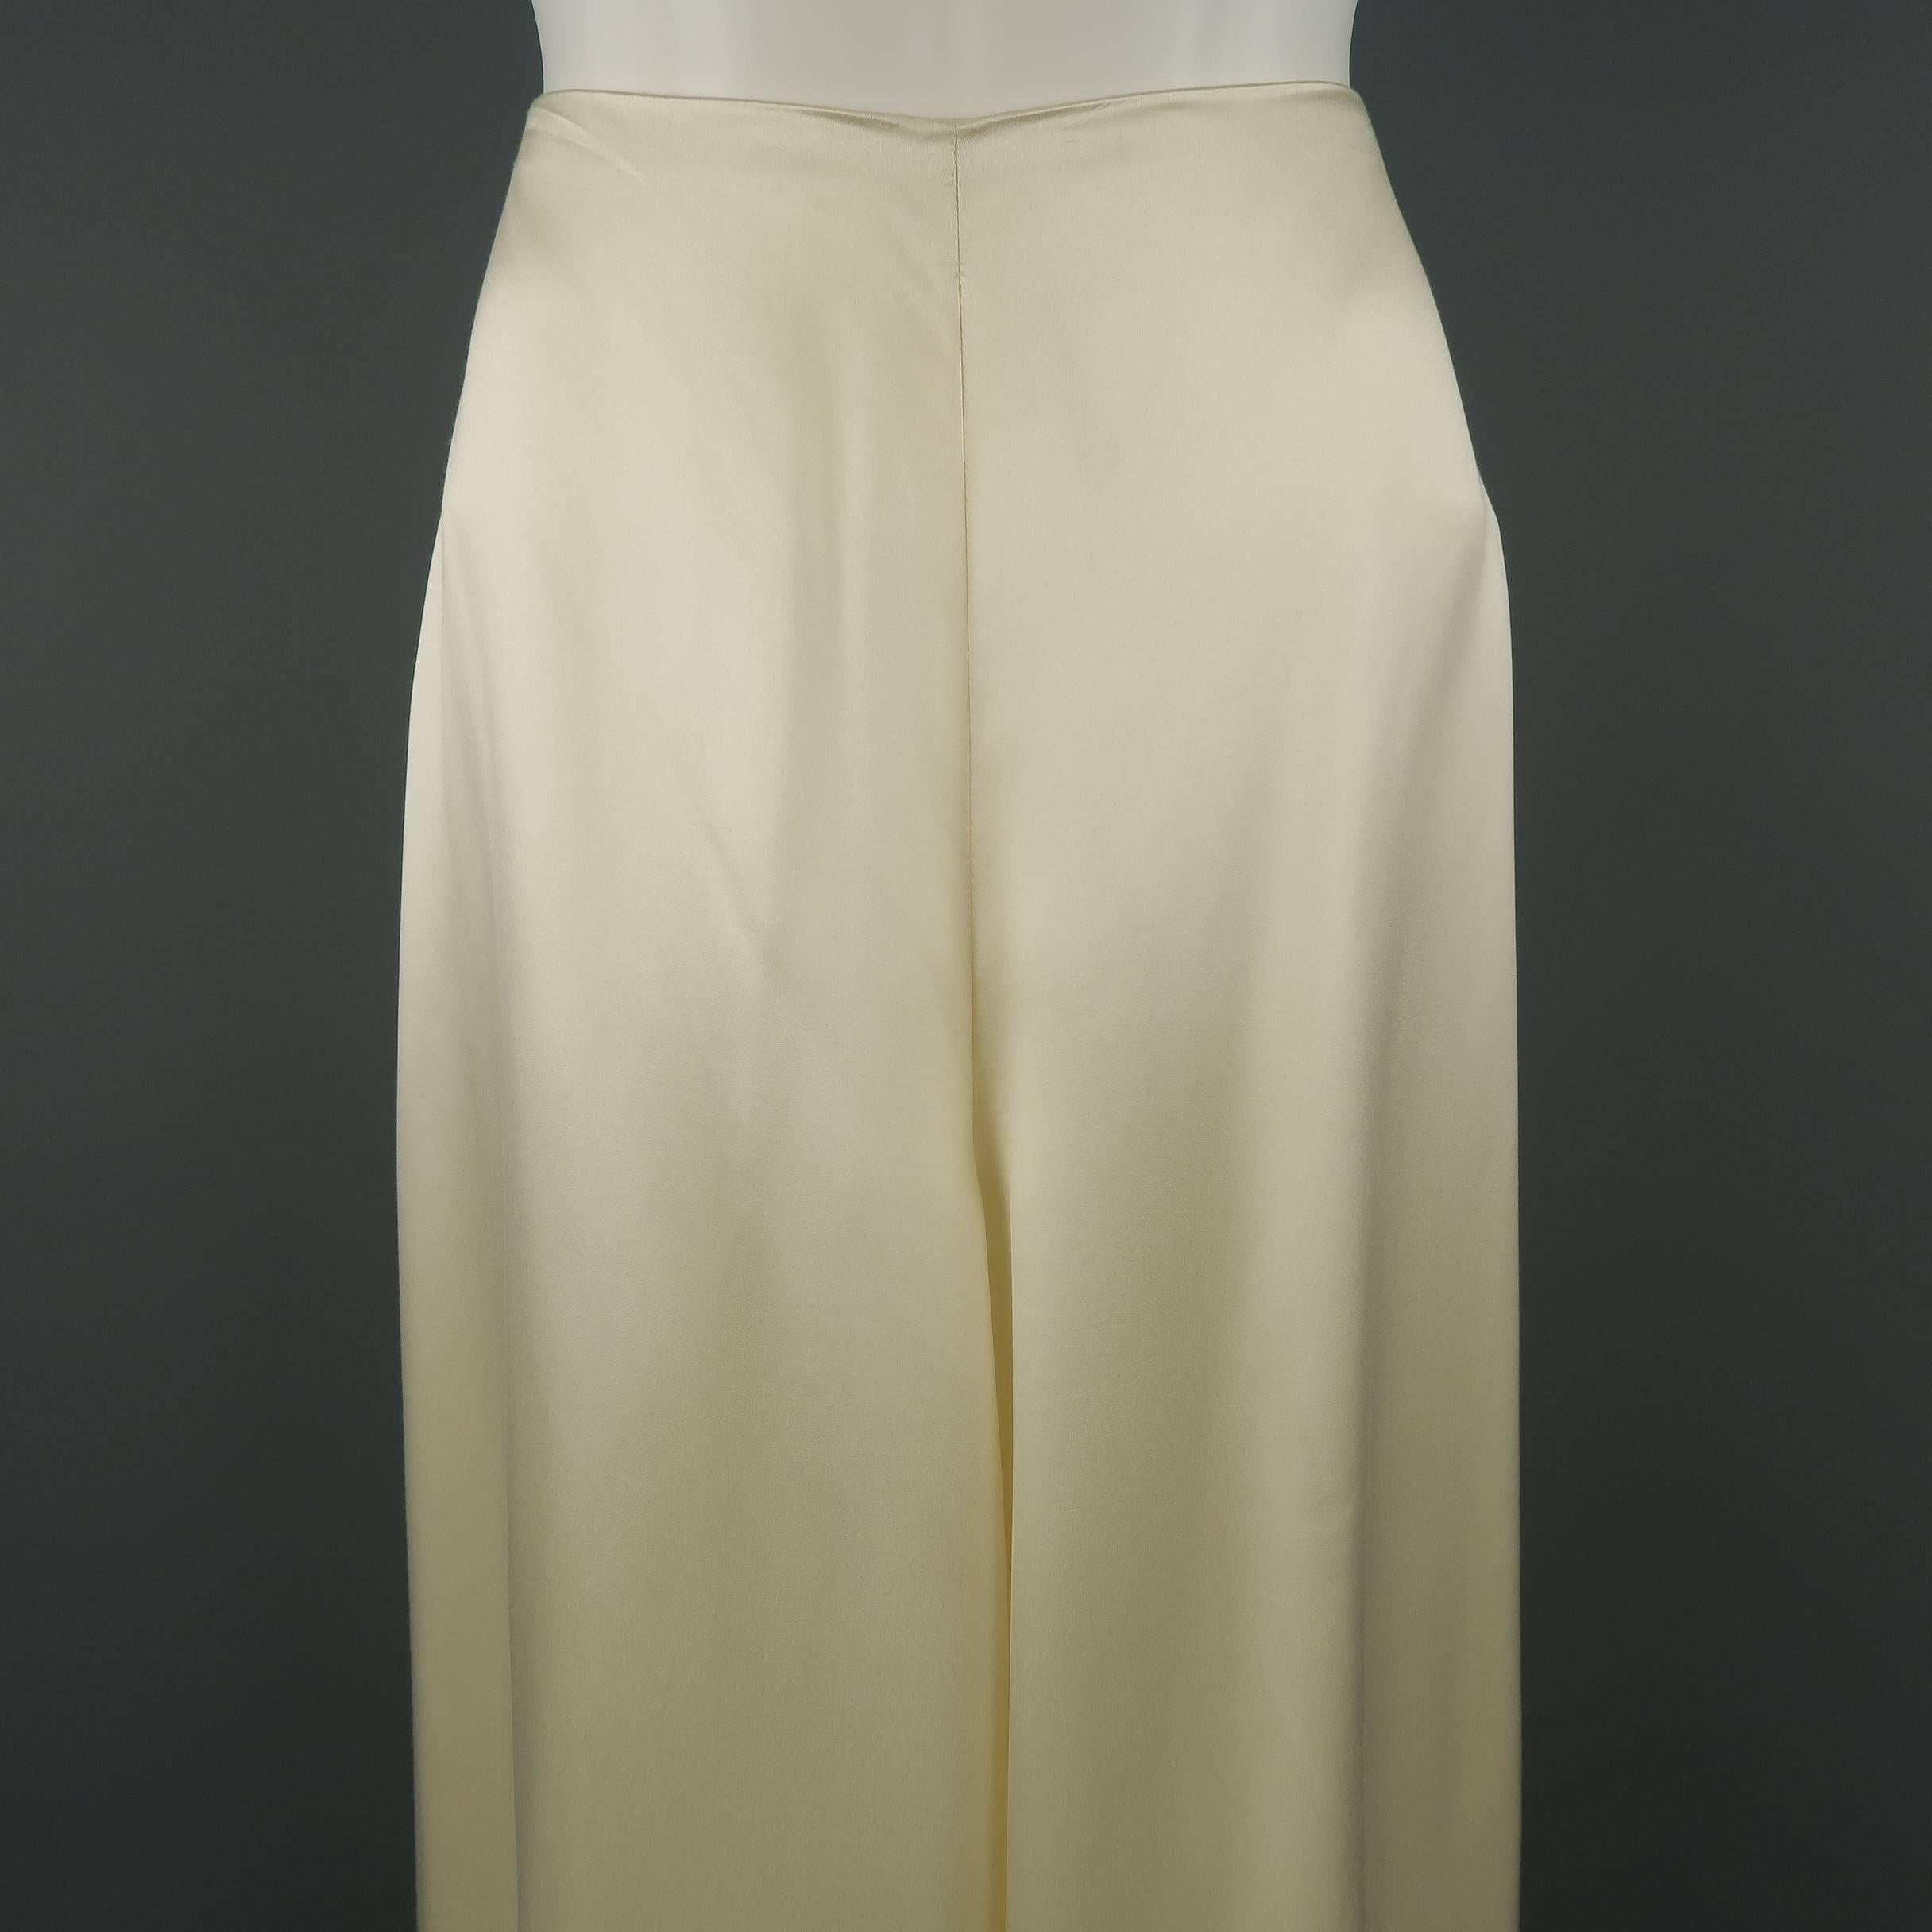 RALPH LAUREN COLLECTION dress pants come in light creamy beige silk blend satin with a minimalist deign, high rise, and extreme wide leg silhouette. Made in USA.
 
Good Pre-Owned Condition.
Marked: 8
 
Measurements:
 
Waist: 27 in.
Rise: 12.5